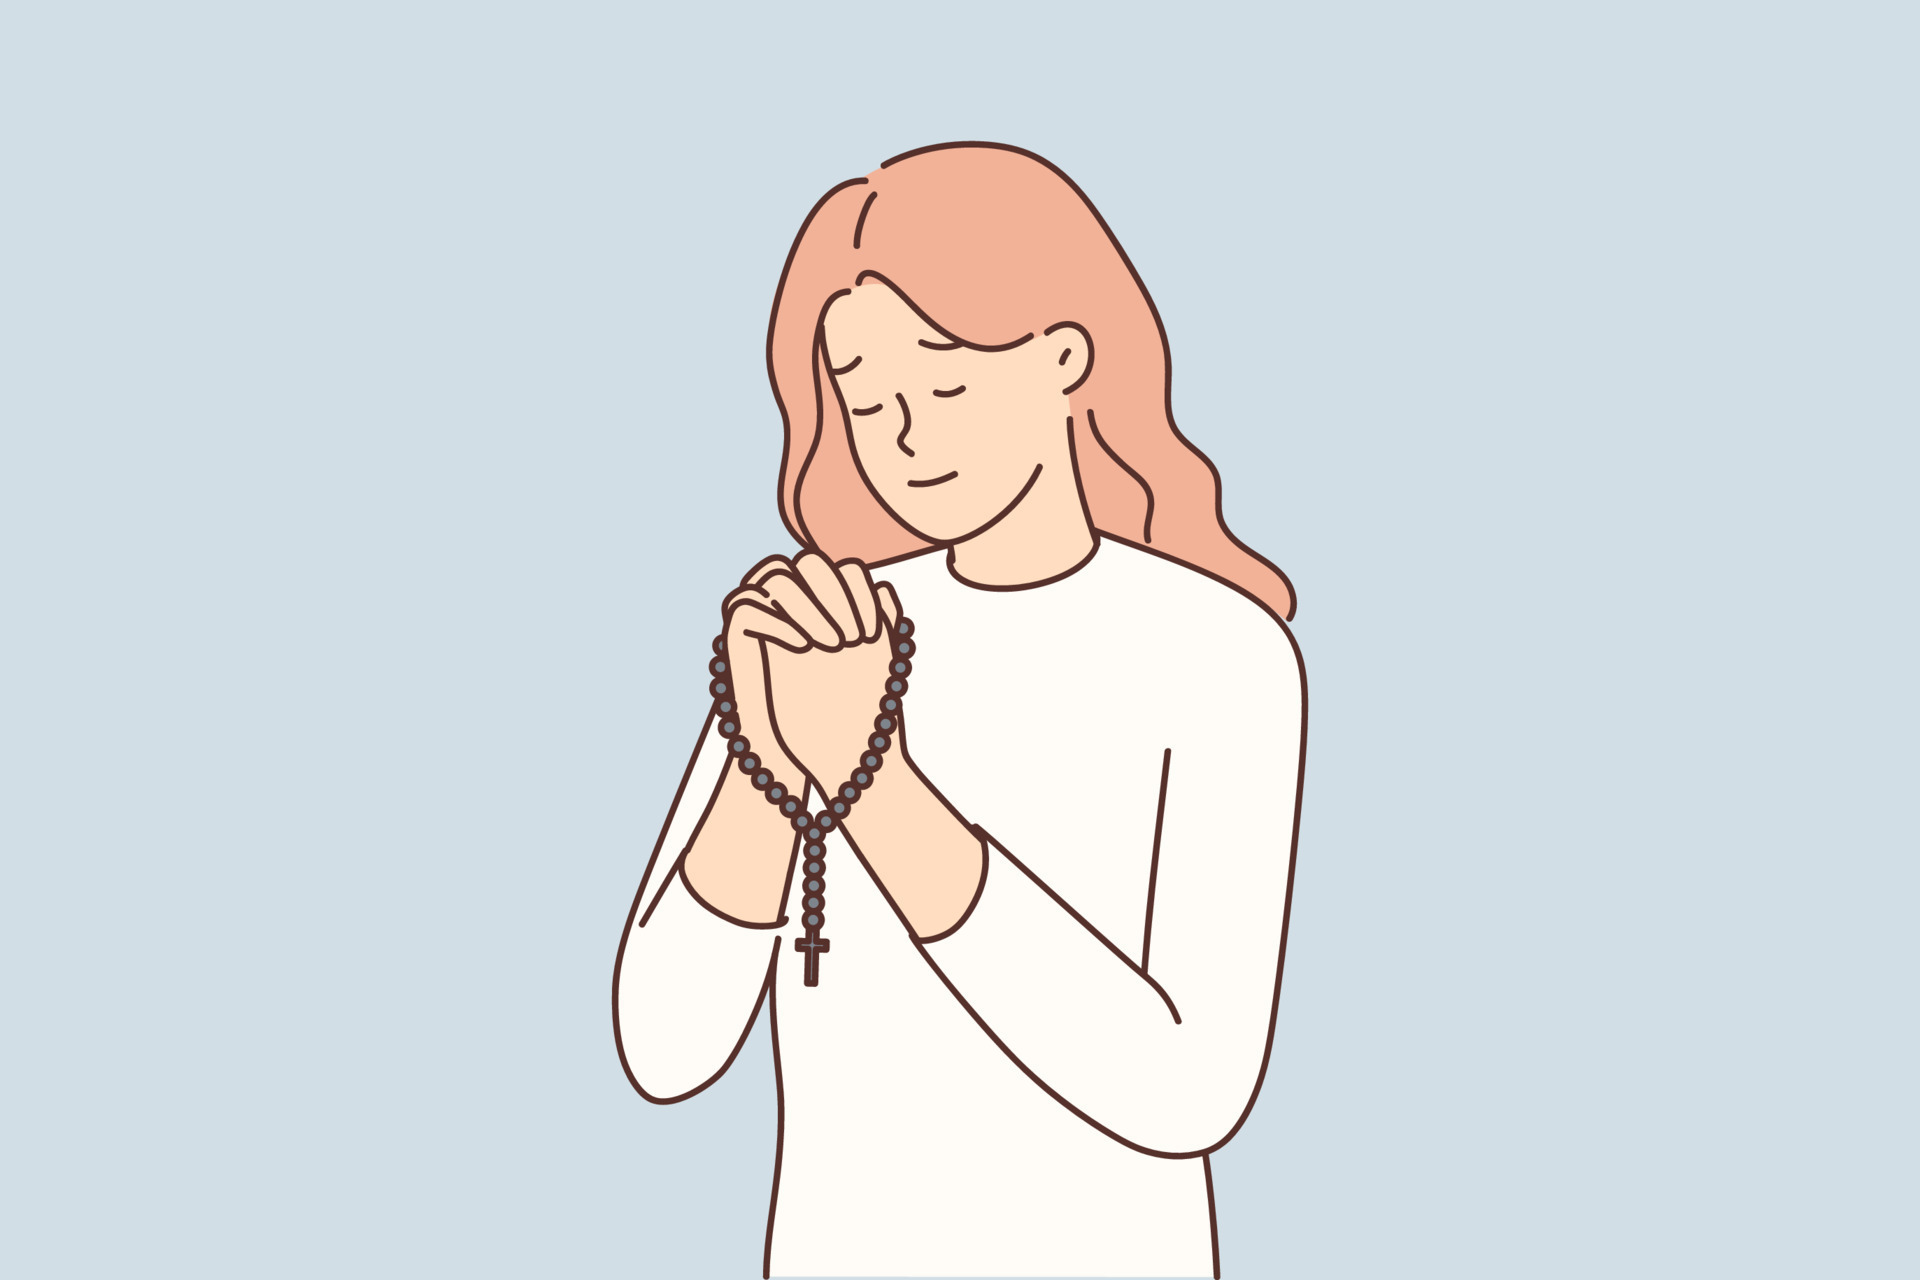 cartoon praying hands with rosary